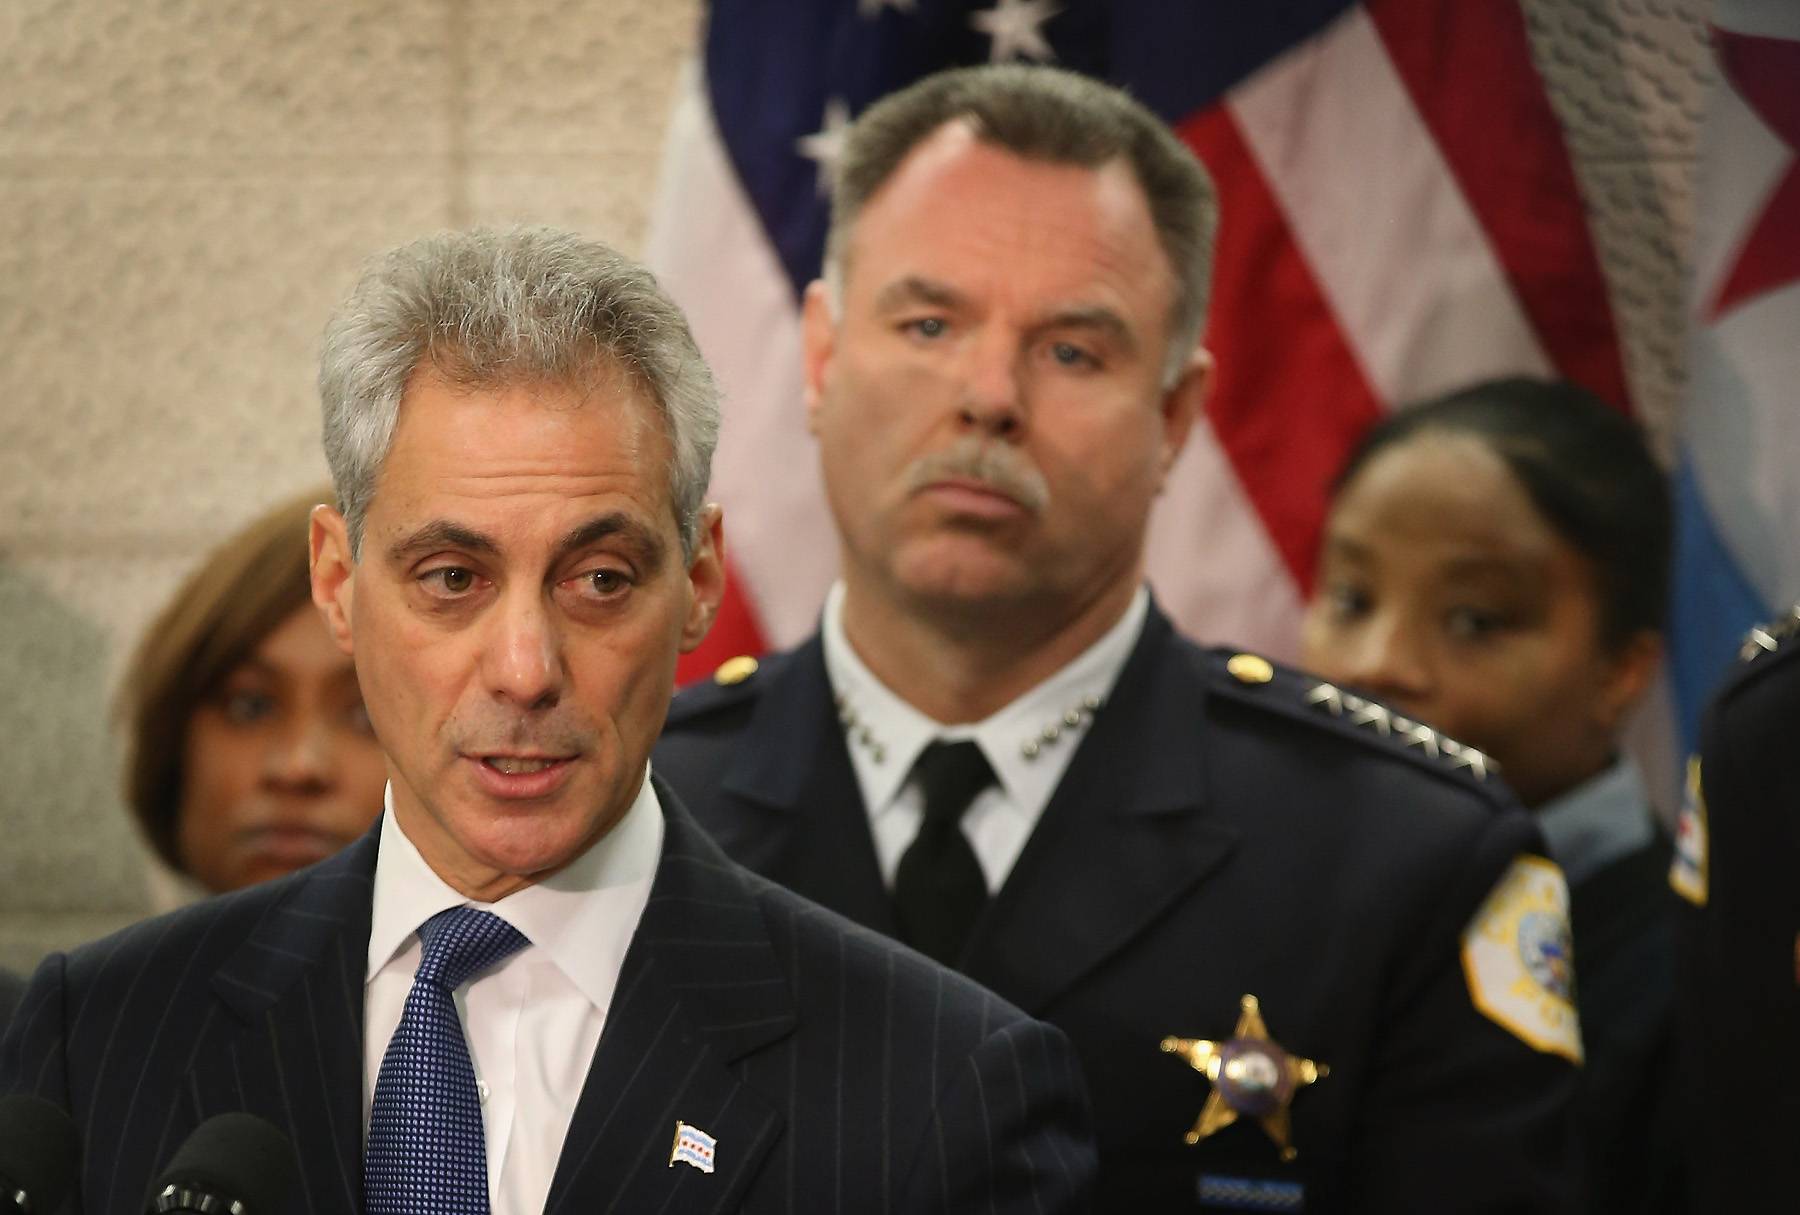 Chicago to Place More Cops on Streets